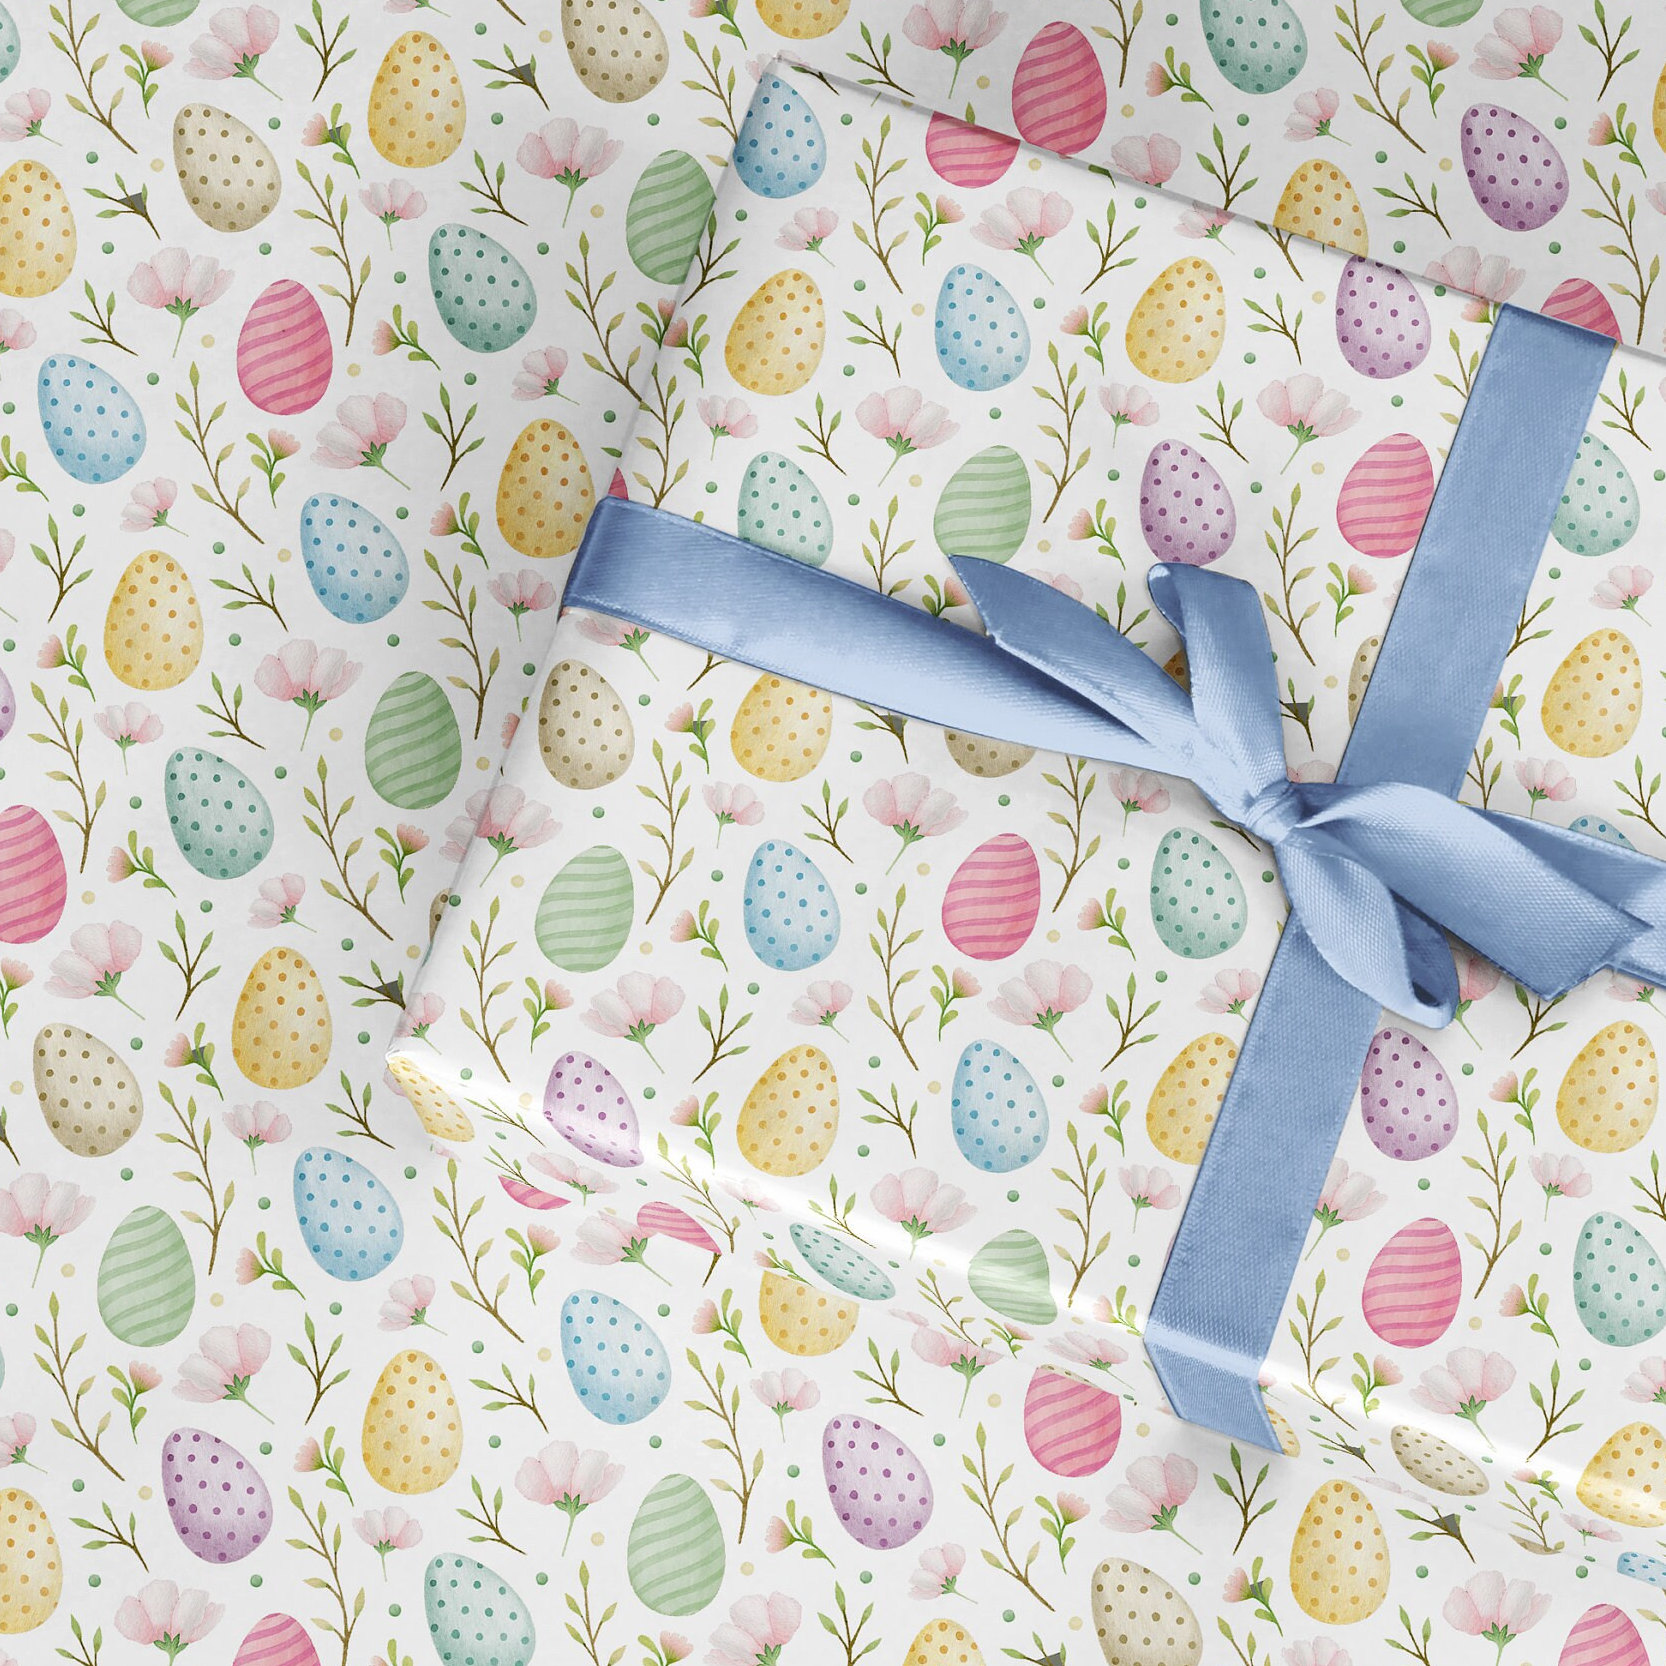 Wrapping Paper Pastel Easter Eggs, Easter Egg Hunt, Roll of Gift Wrap for  Basket Gifts, for Boys Girls, Fun Cute Pretty Nice Wrapping 